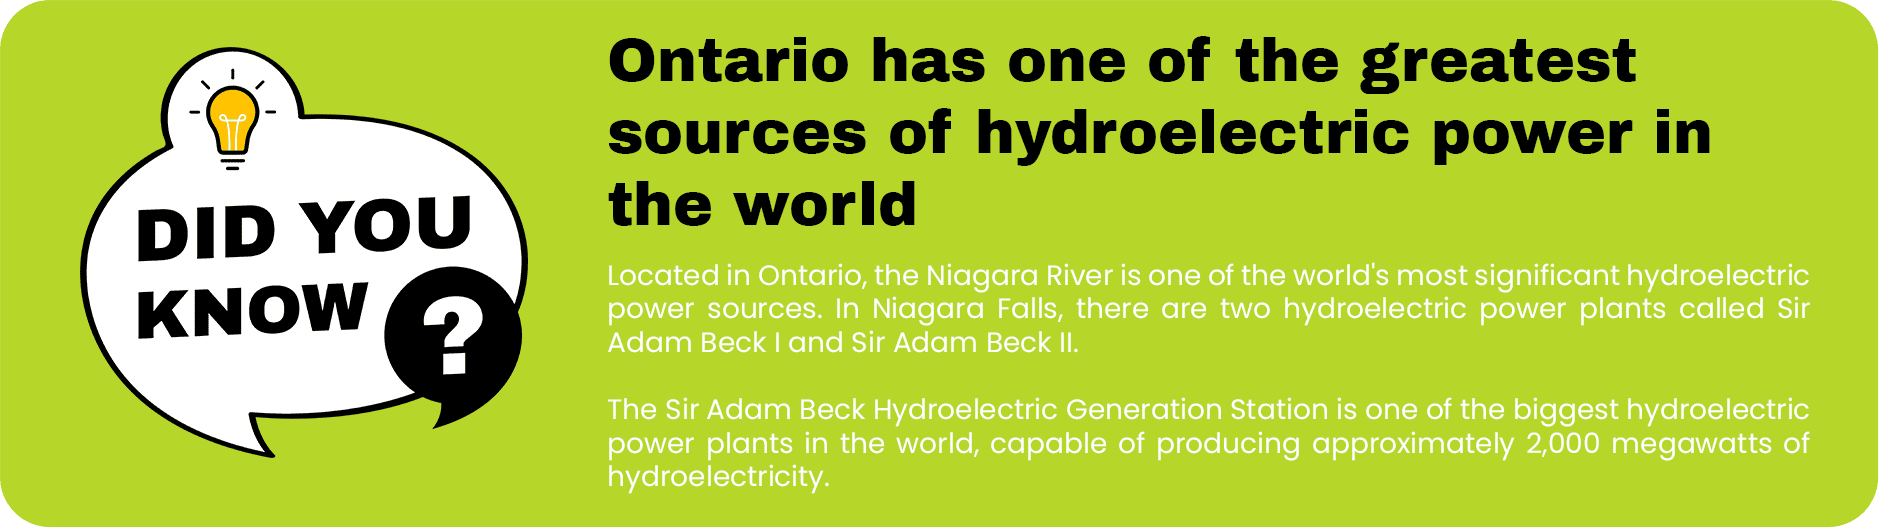 Infographic highlighting that Ontario has one of the largest hydroelectric power sources in the world, specifically the Niagara River and the Sir Adam Beck Hydroelectric Generation Stations, making it a preferred location for professional industries